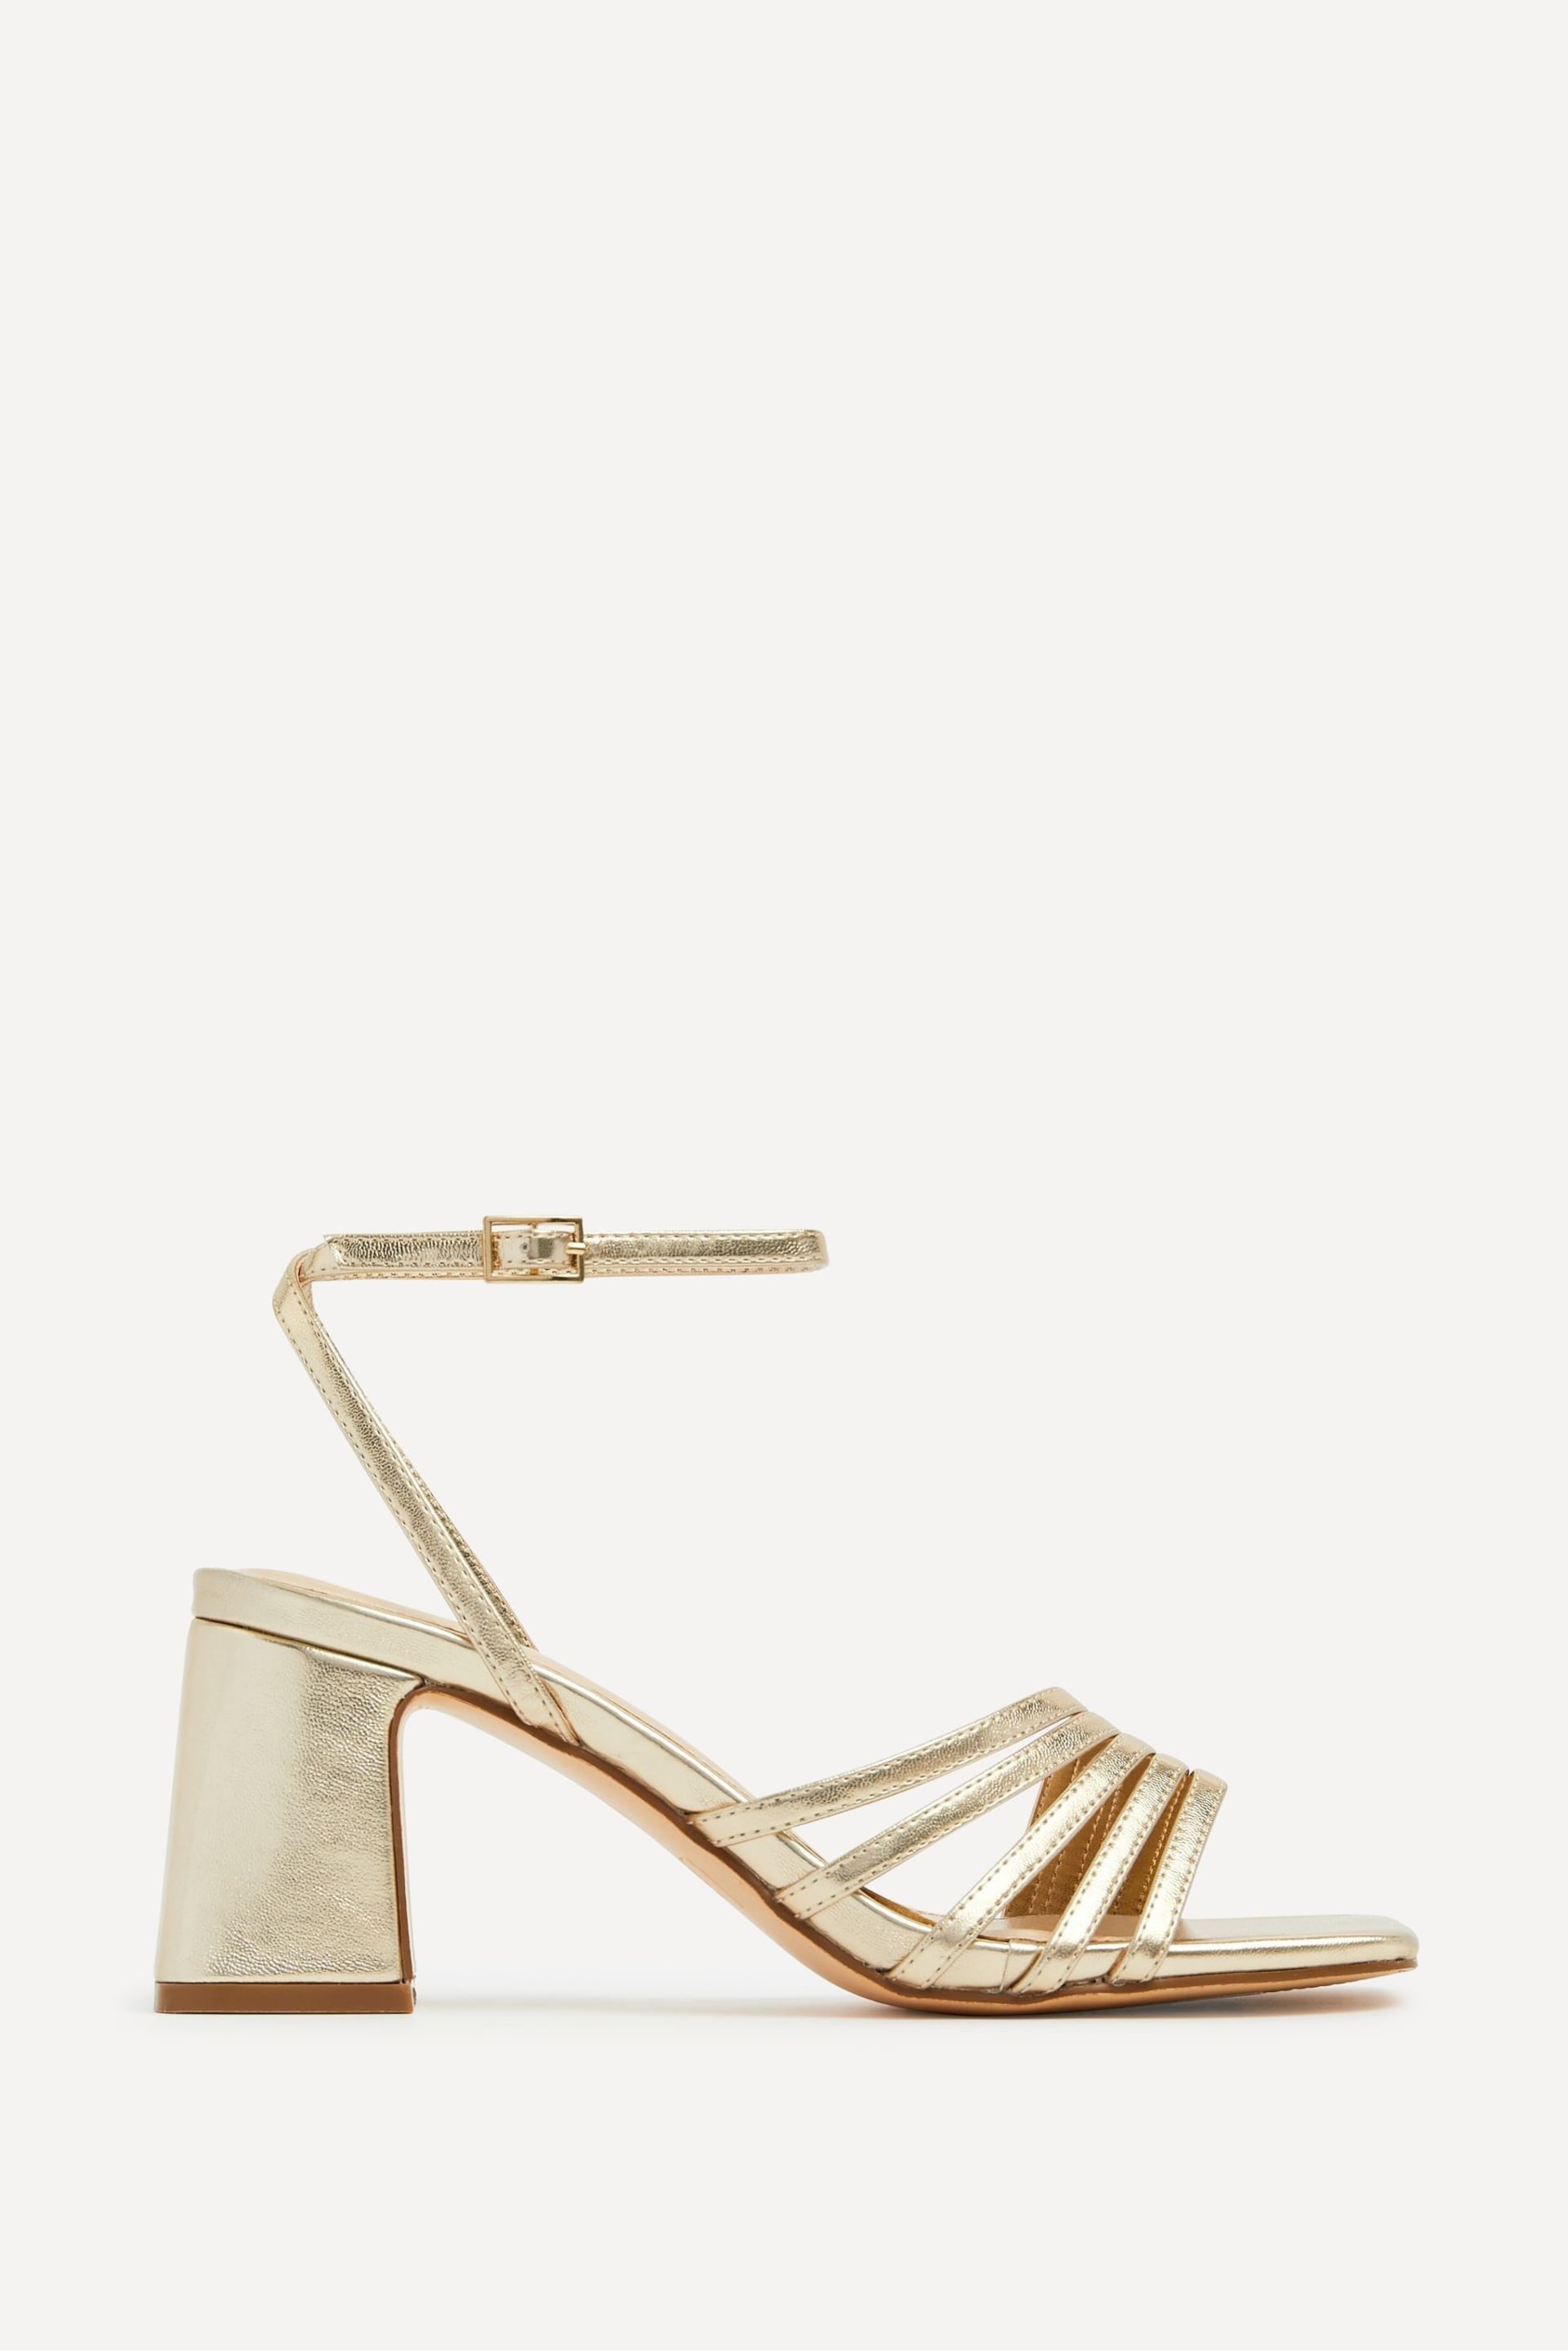 Linzi Gold Aronia Strappy Heeled Sandals With Block Heel - Image 2 of 5